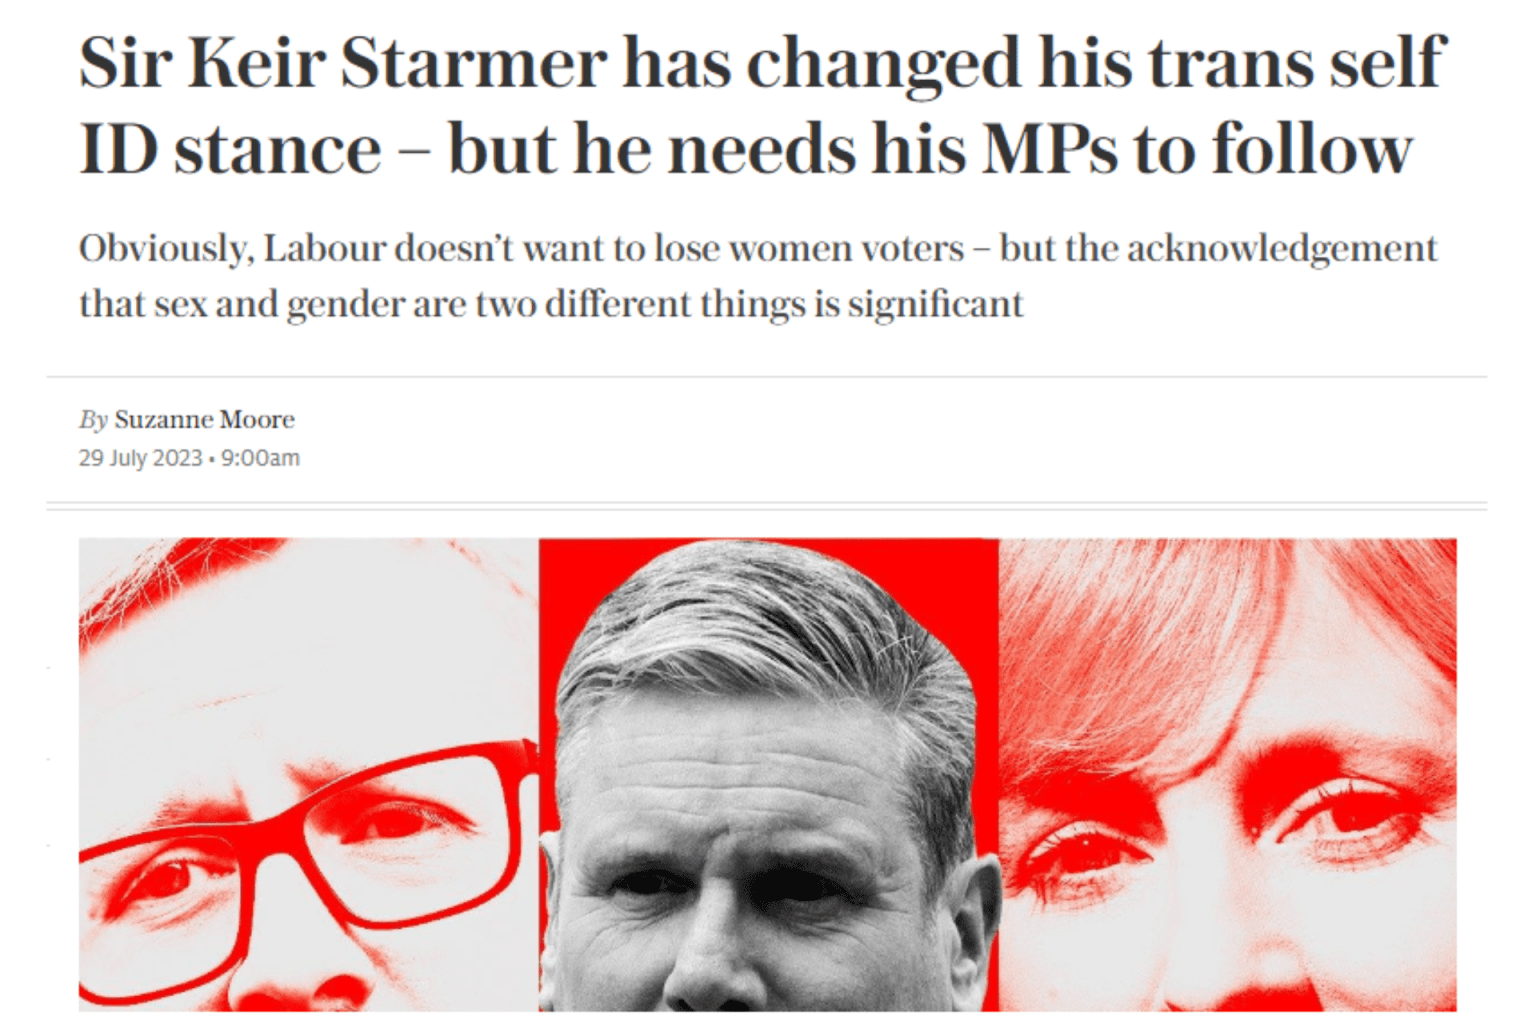 Suzanne Moore - Telegraph - Keir Starmer - Labour policy change concerning Gender Recognition Act reform